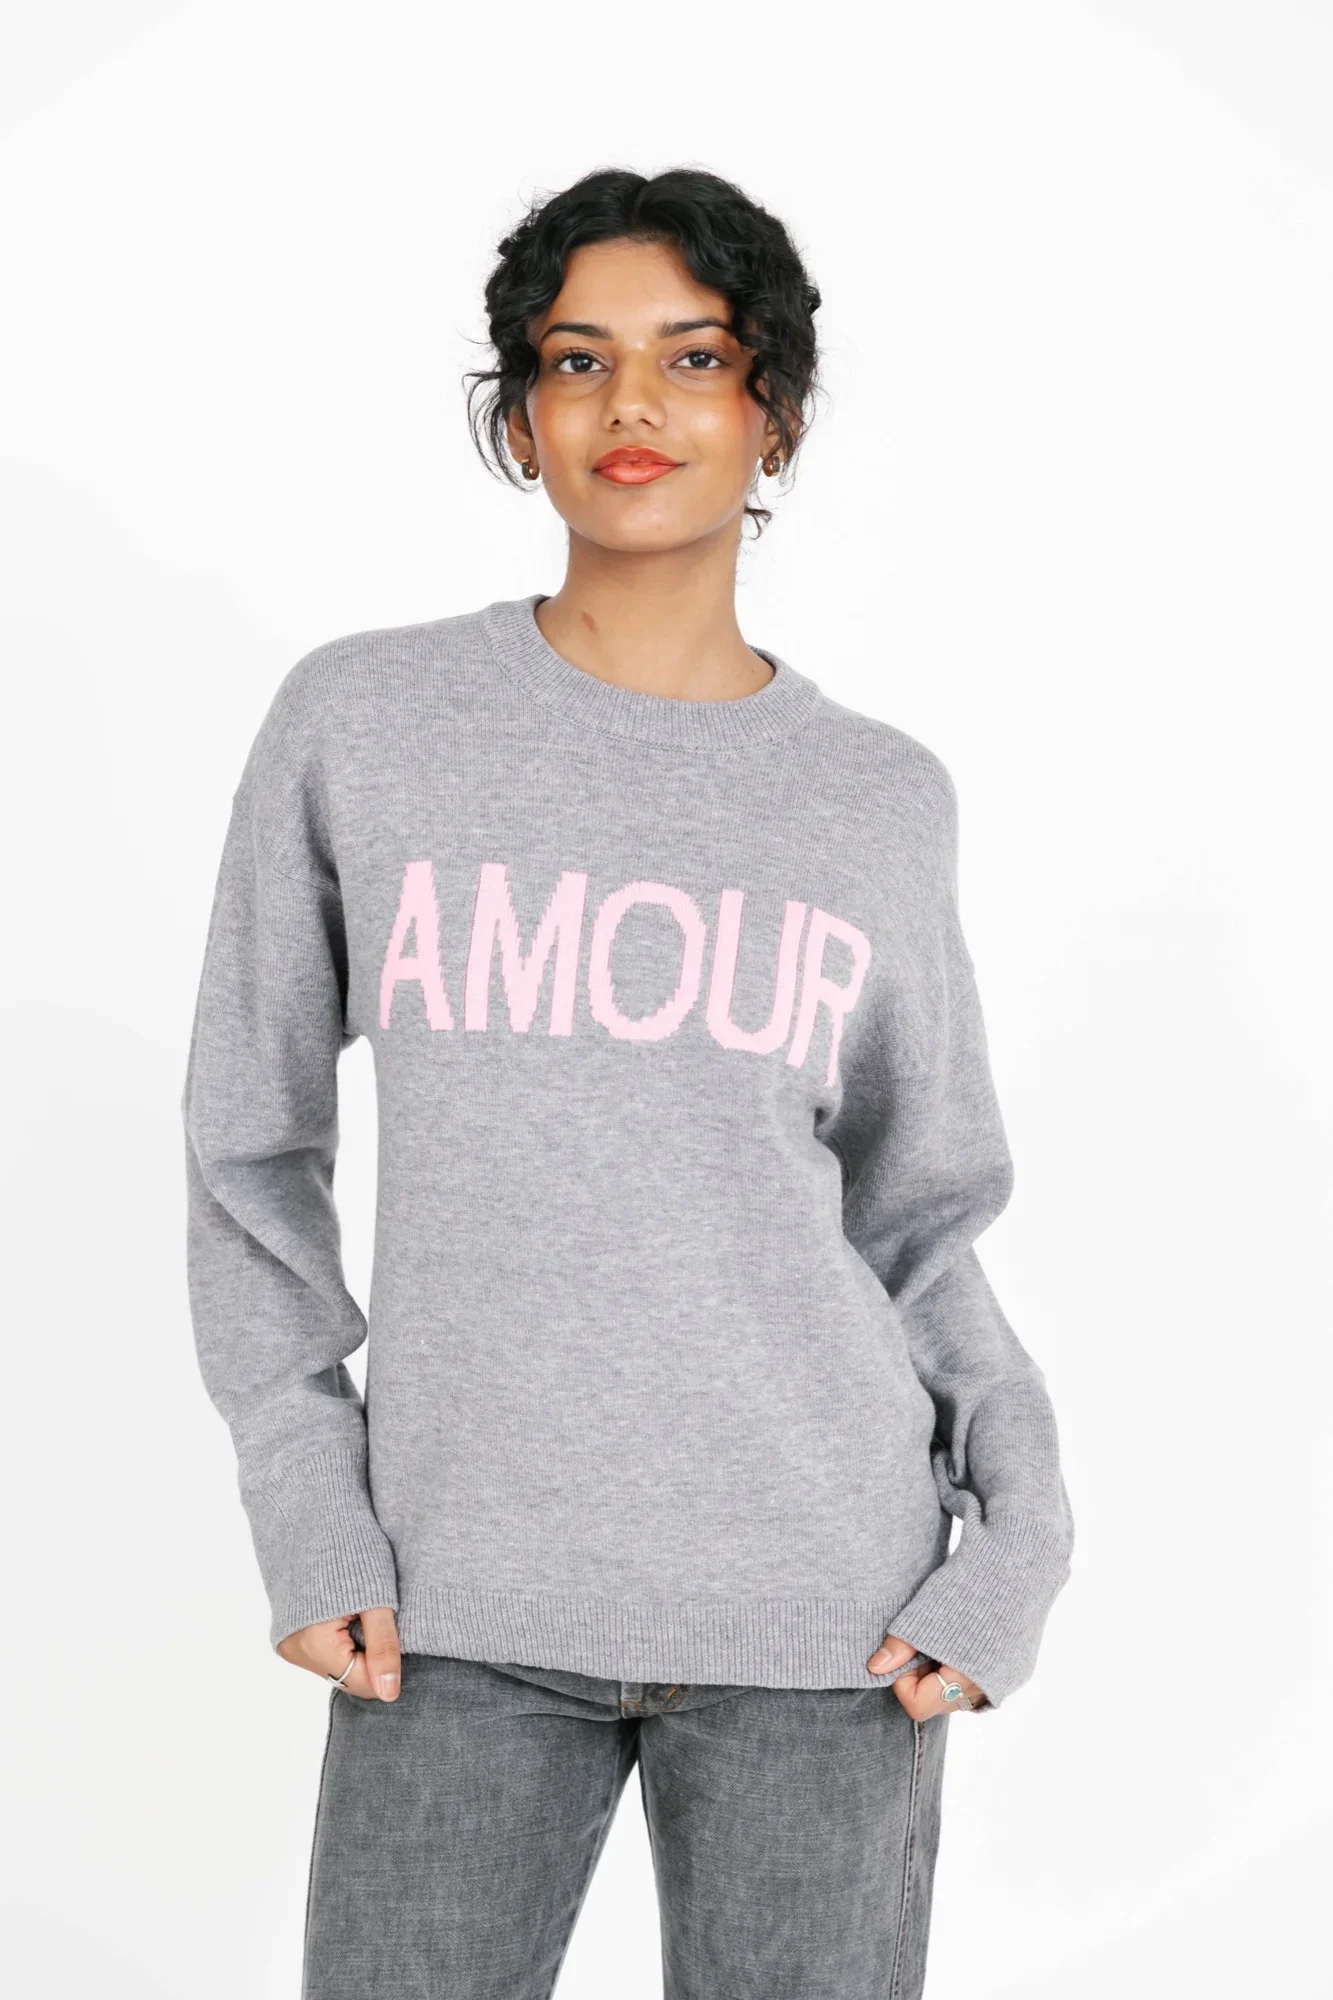 Image of Amour Sweater in Grey/Pink